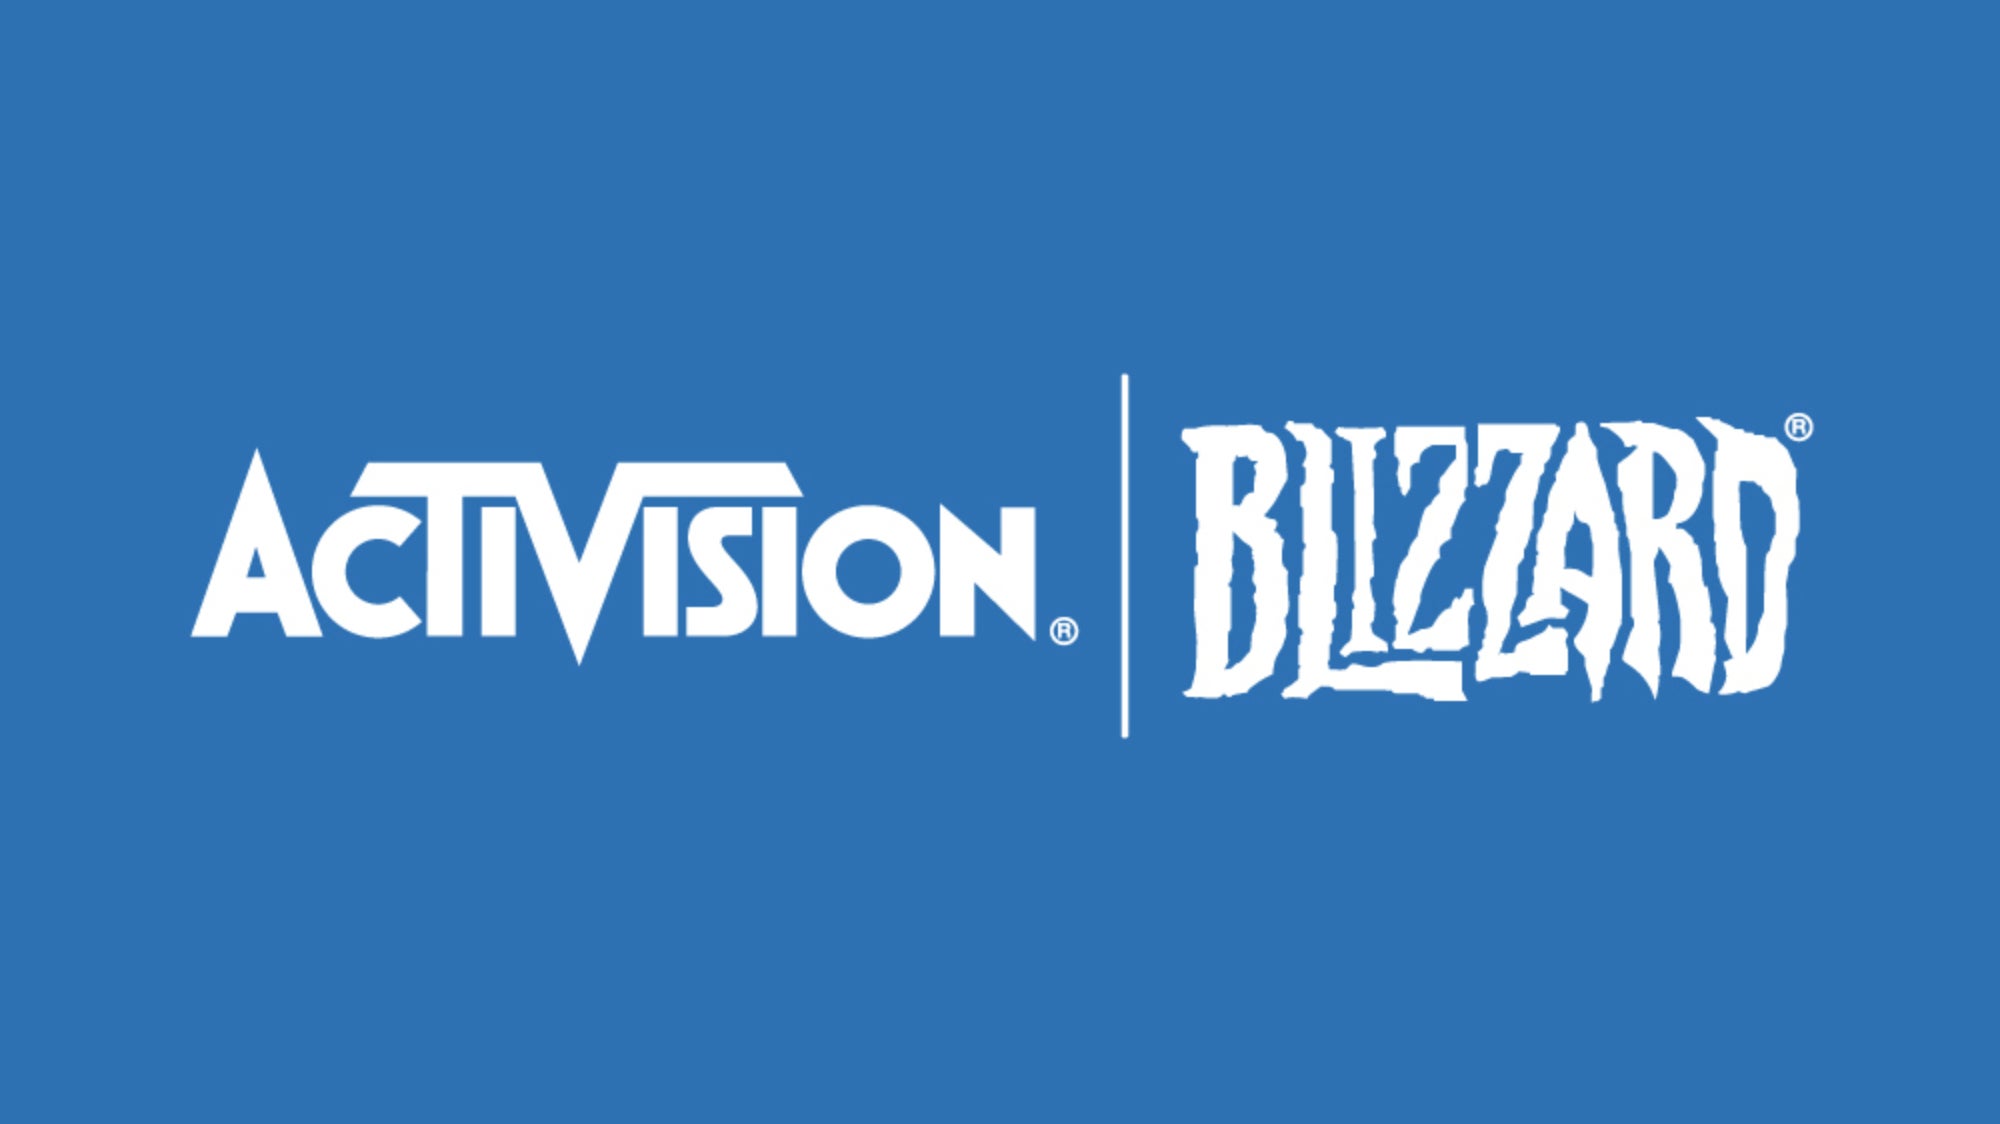 UK's competition regulator to undertake in-depth investigation of Microsoft-Activision deal